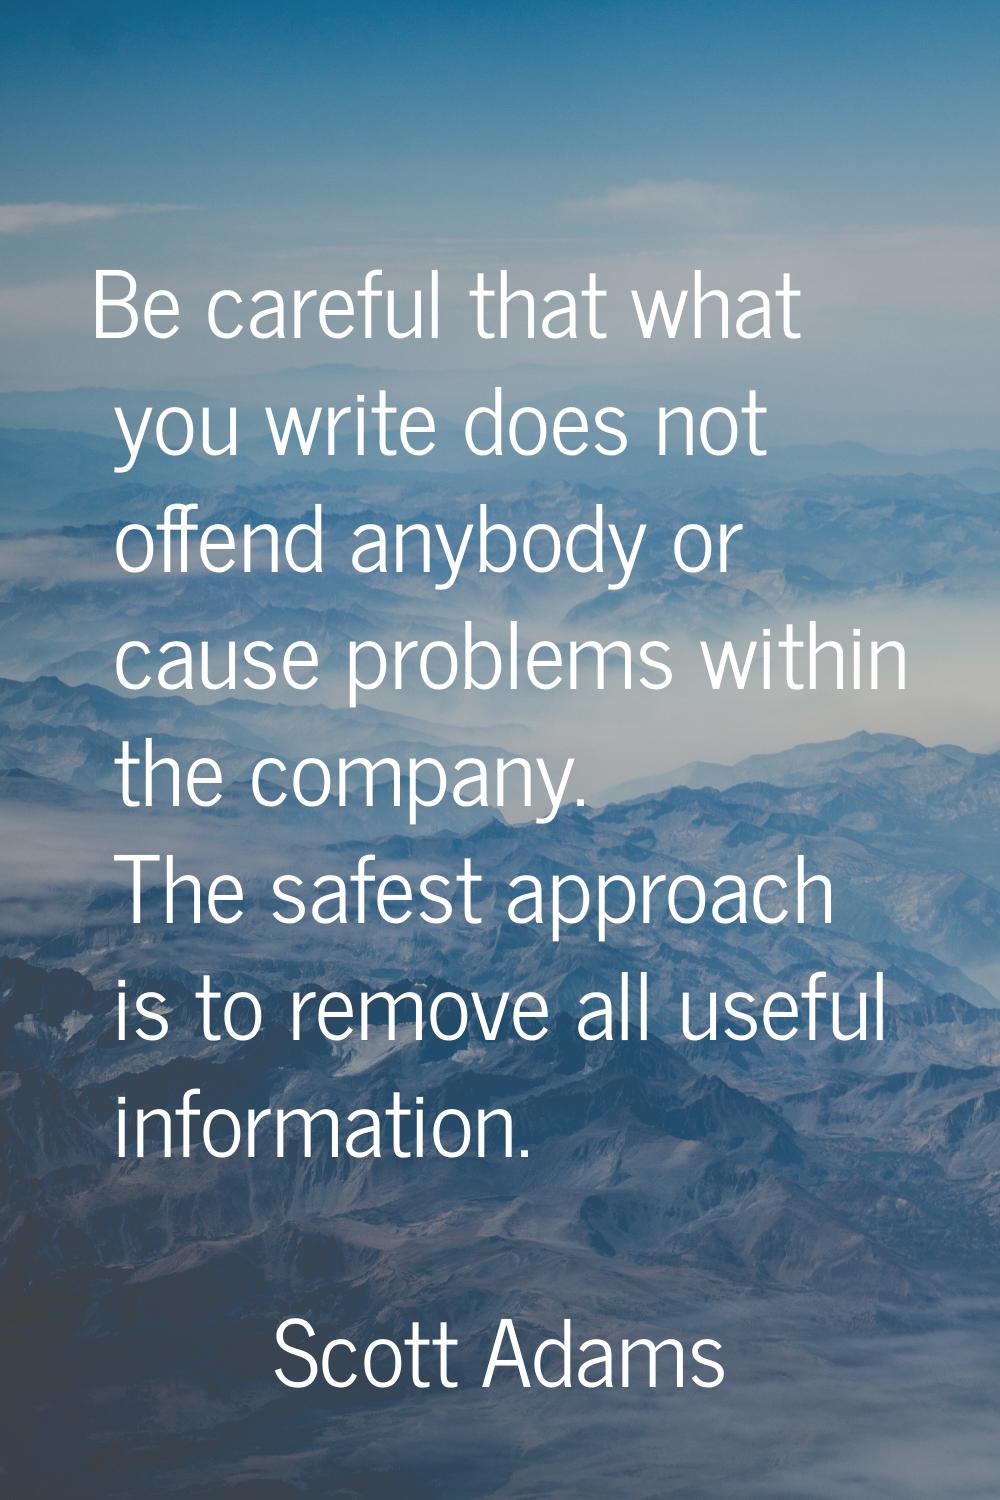 Be careful that what you write does not offend anybody or cause problems within the company. The sa